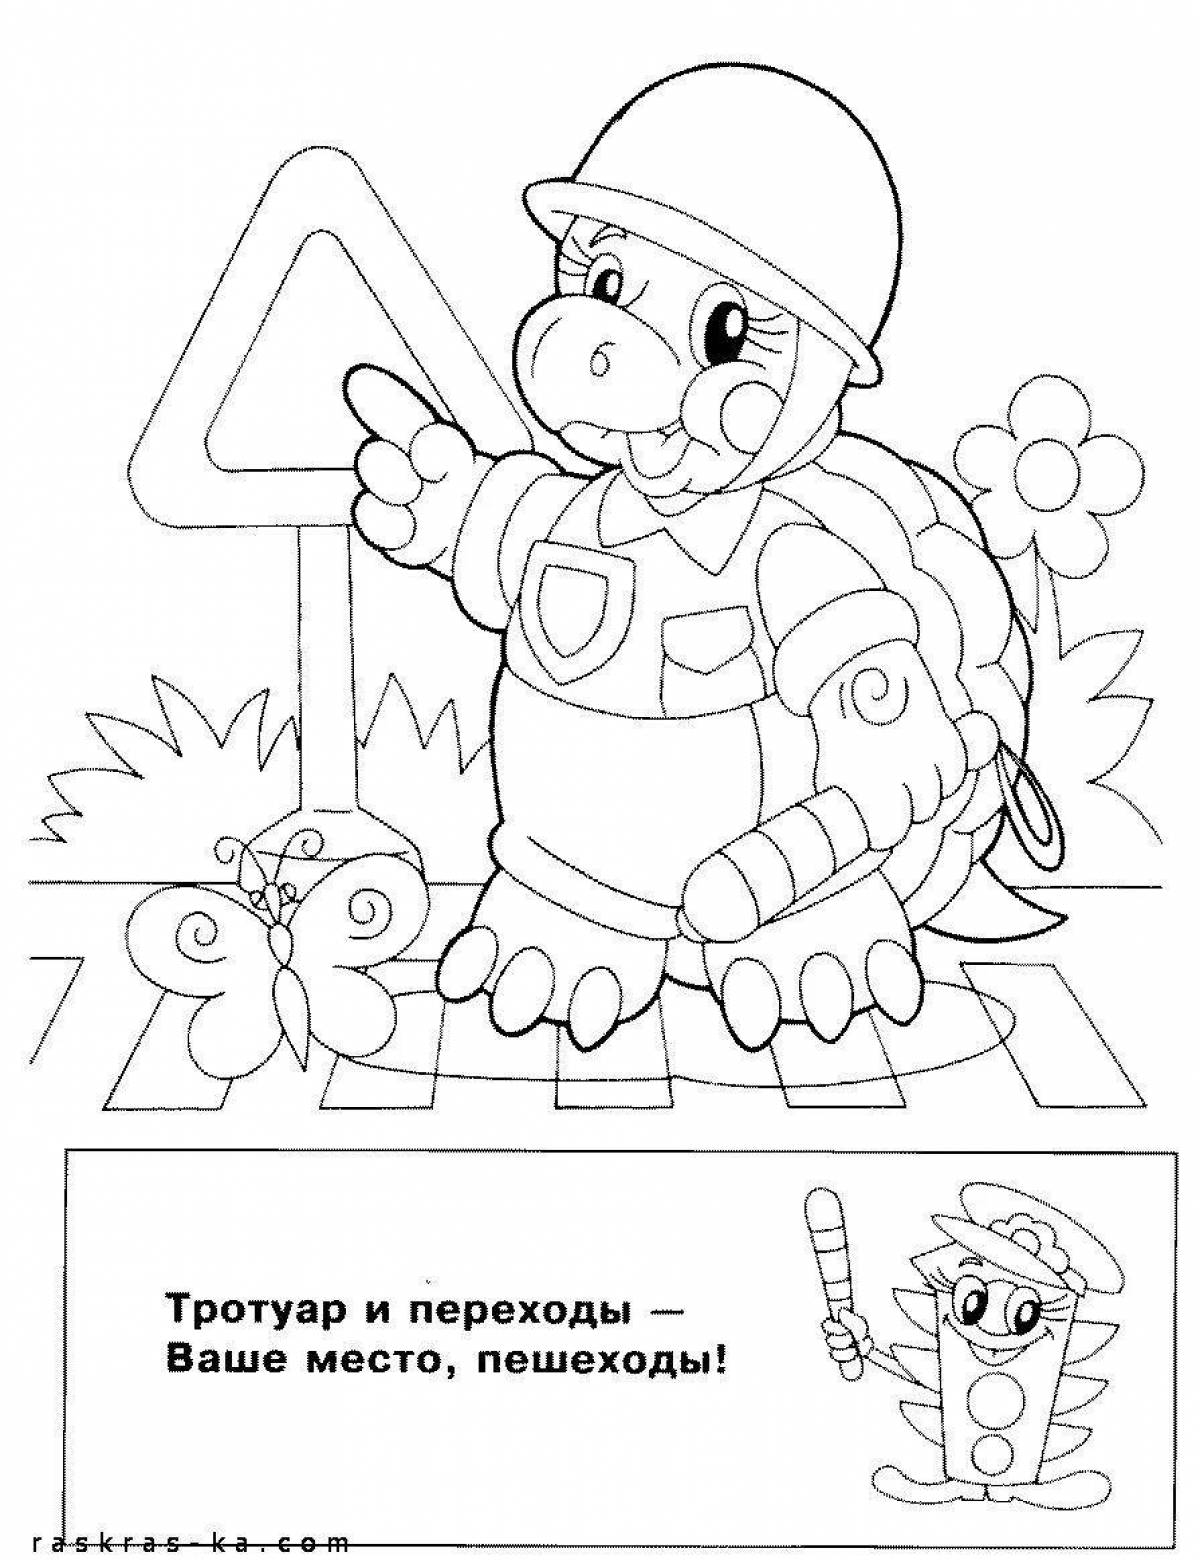 According to traffic rules for children 5 6 years old in kindergarten #5